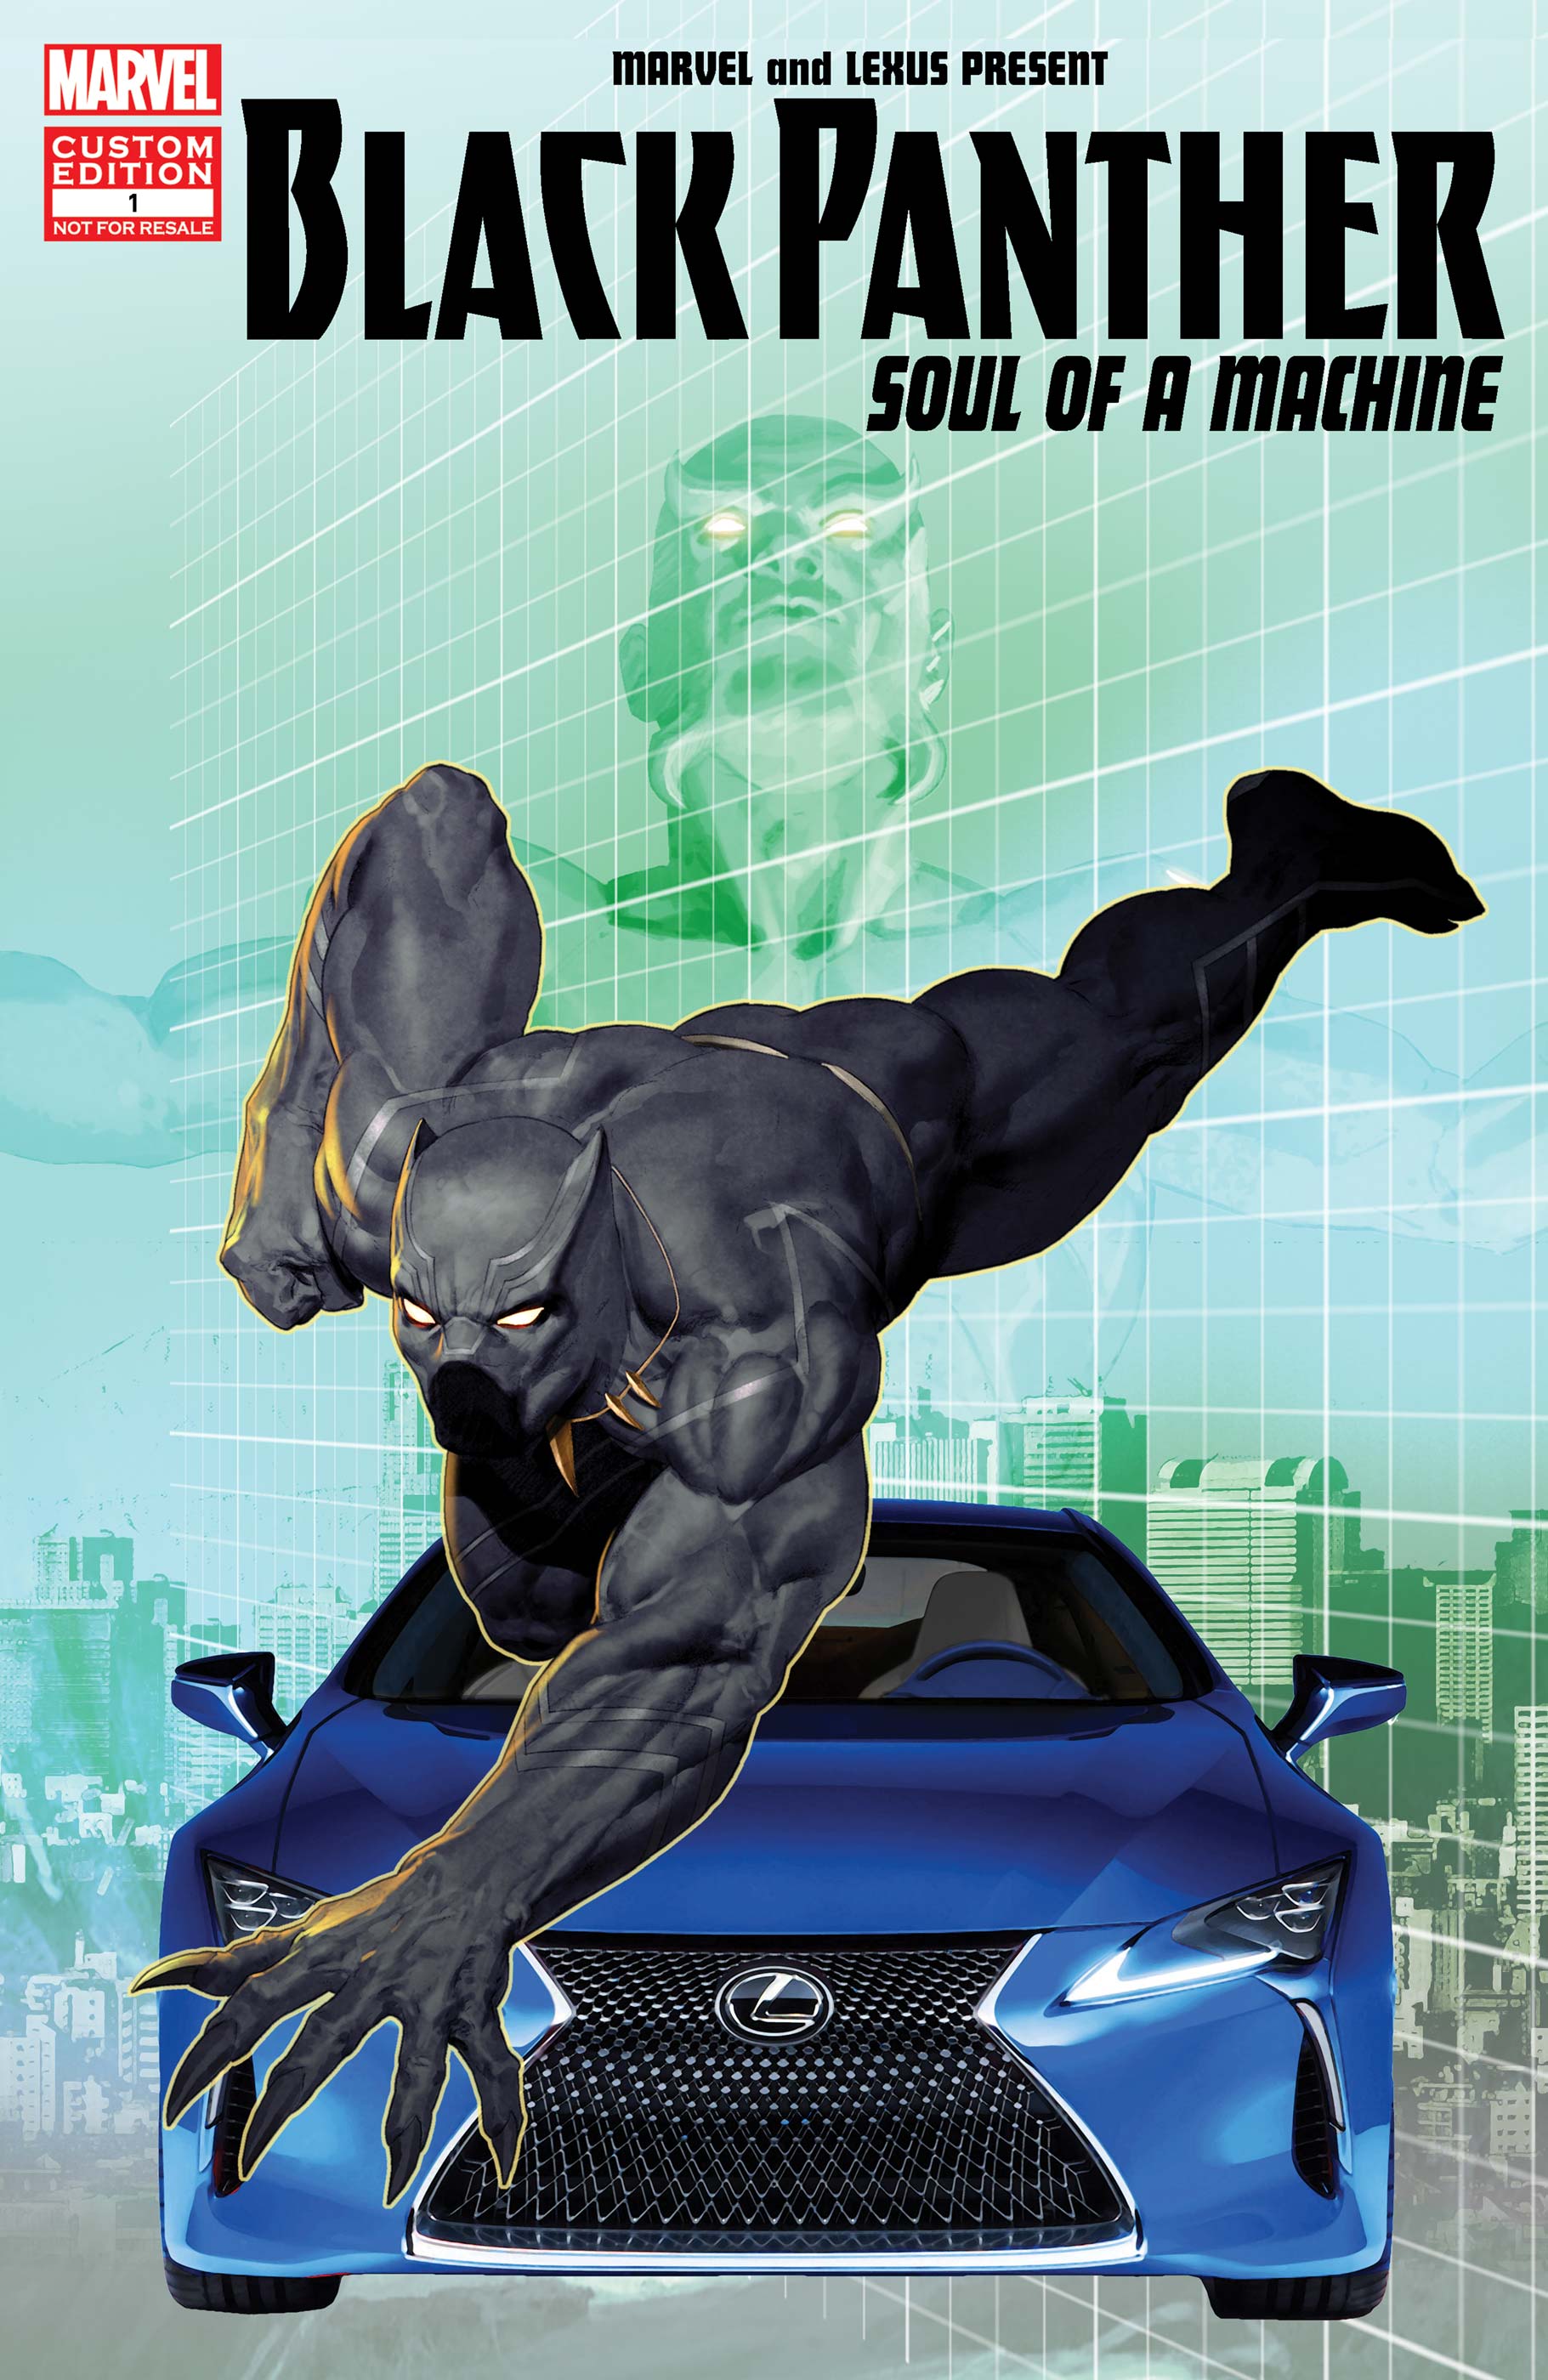 Black Panther: Soul of a Machine – Chapter One (2017)